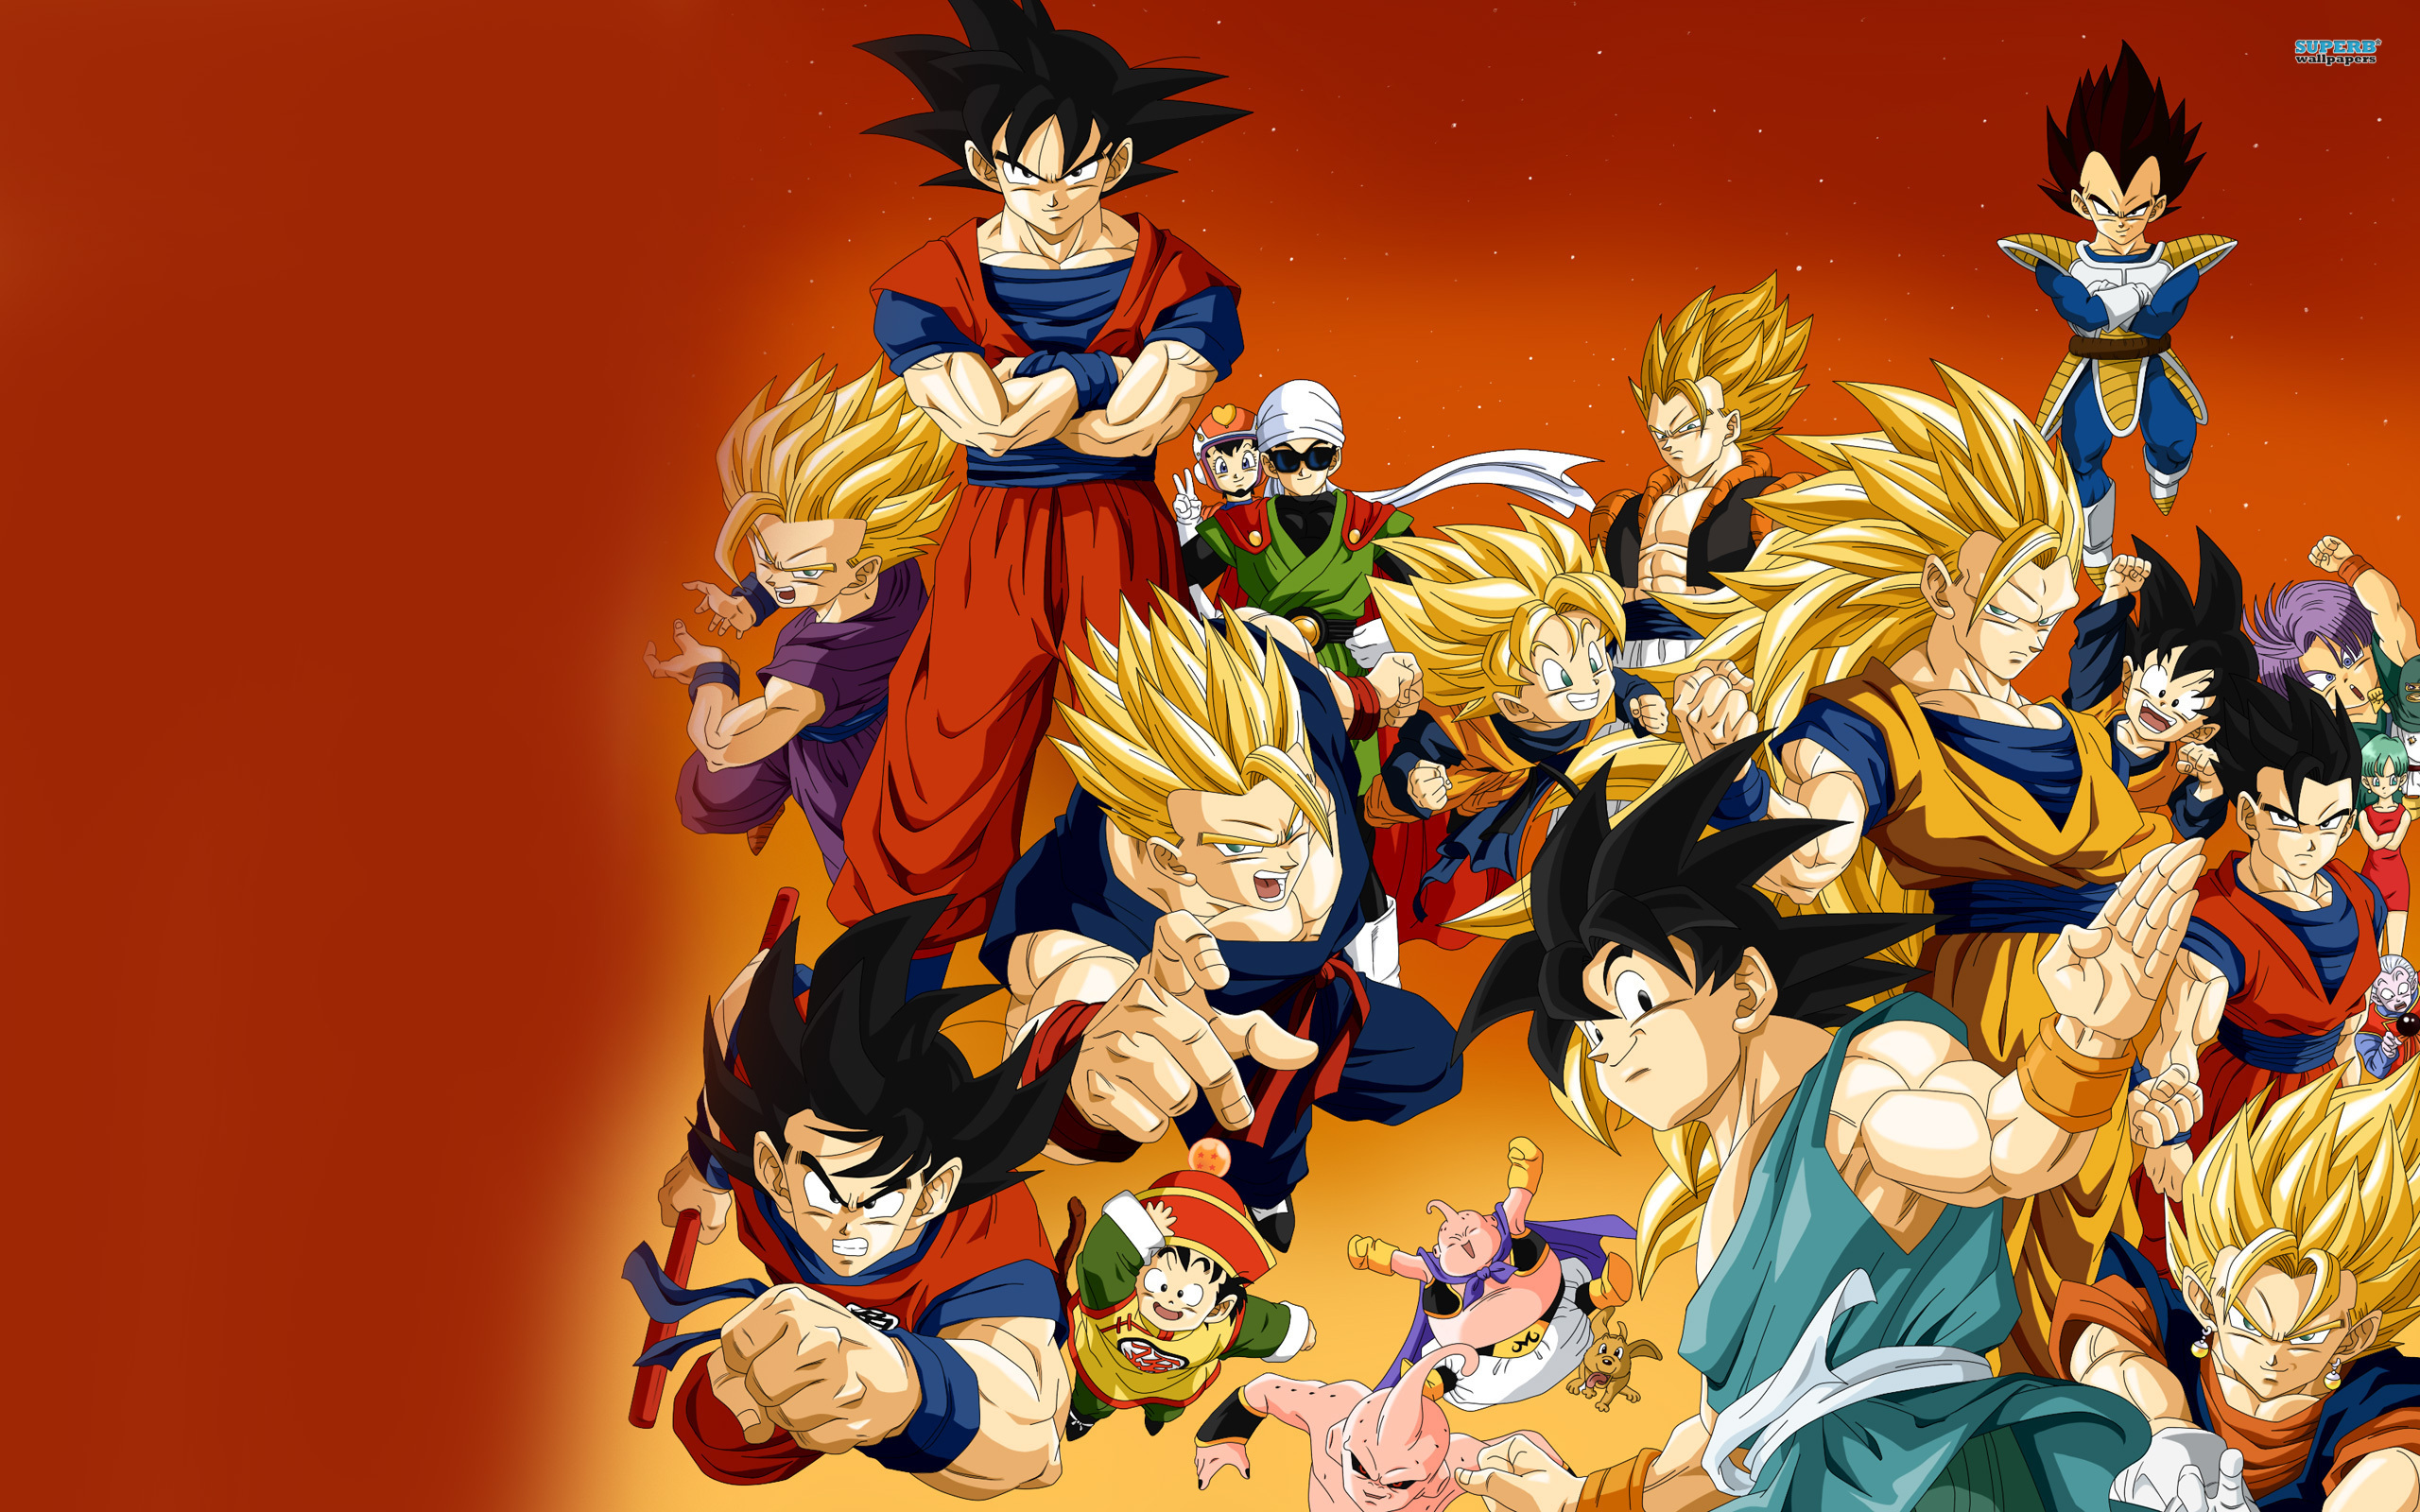 Dragon Ball Z Wallpapers Goku  HD Wallpapers, Backgrounds, Images 